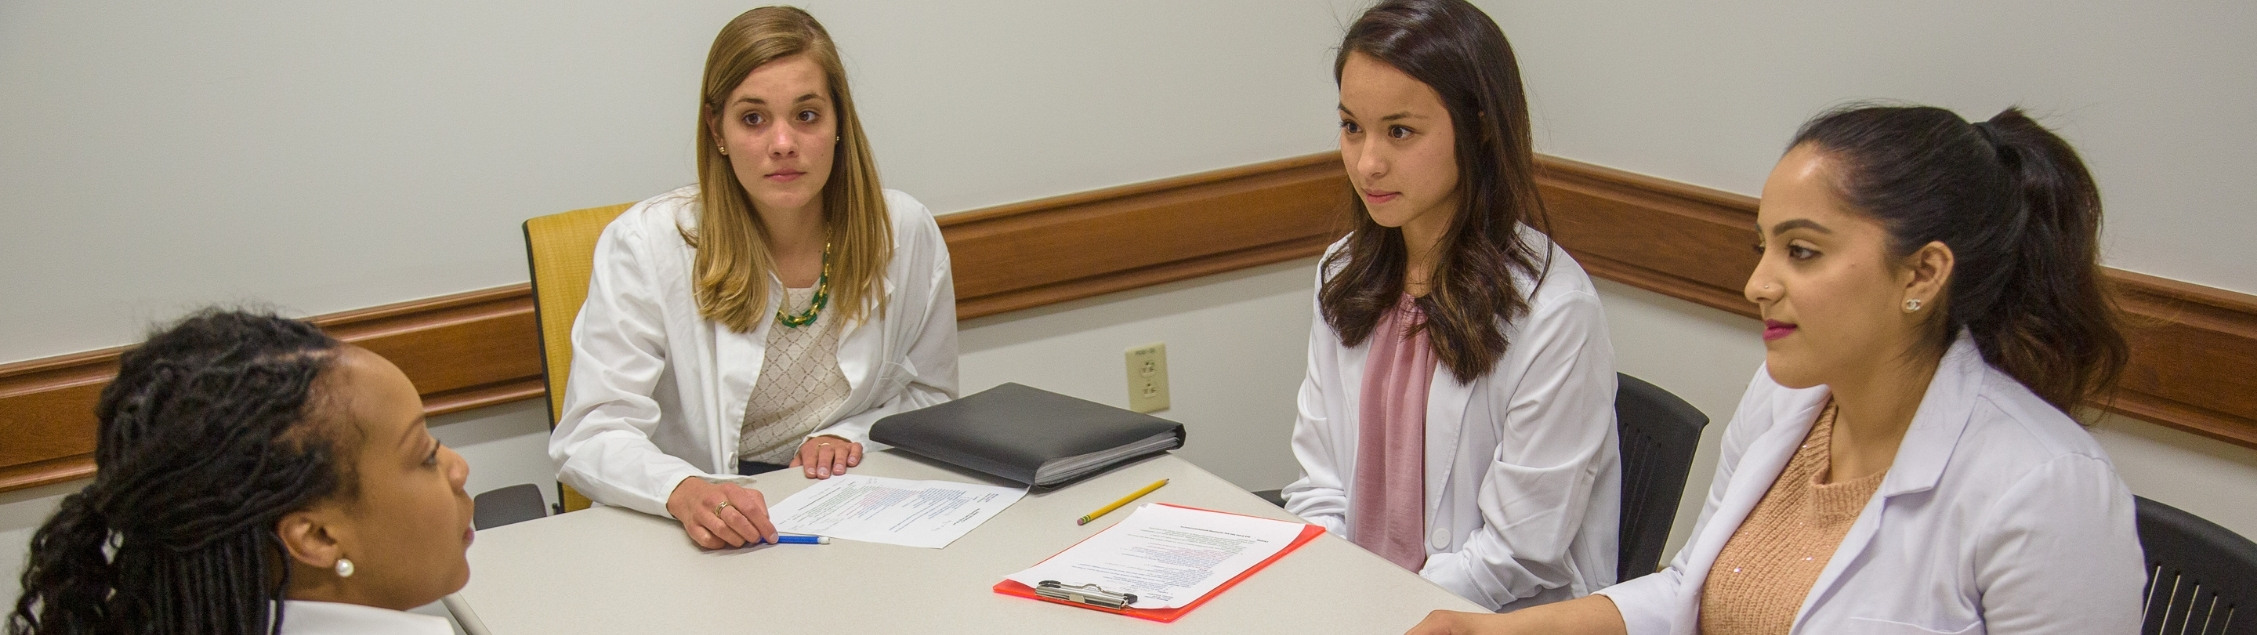 Students in white coats sit at interview table